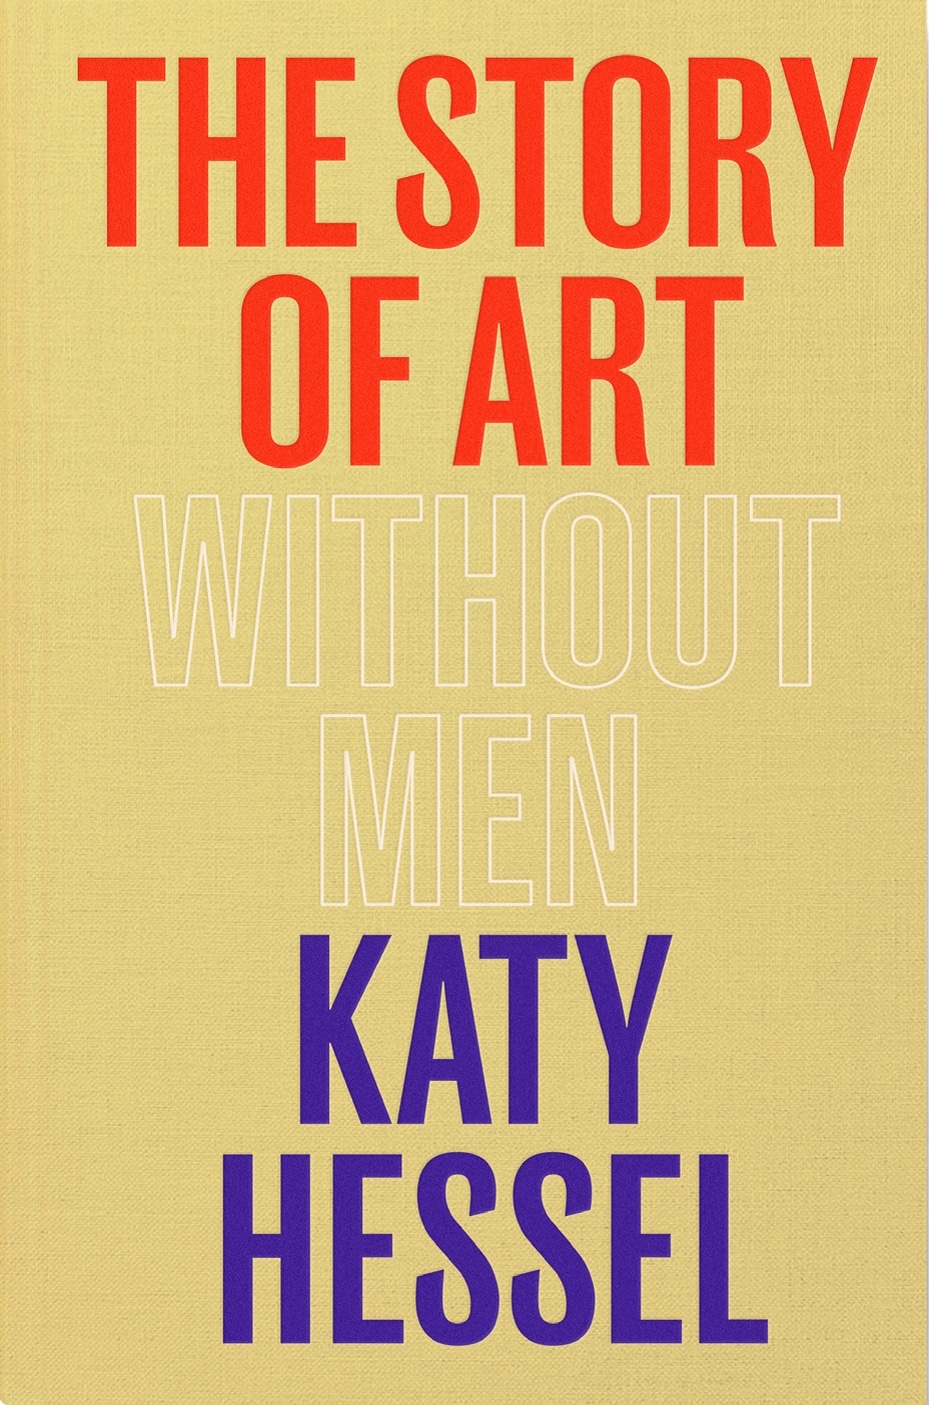 Book “The Story of Art without Men” by Katy Hessel — September 8, 2022